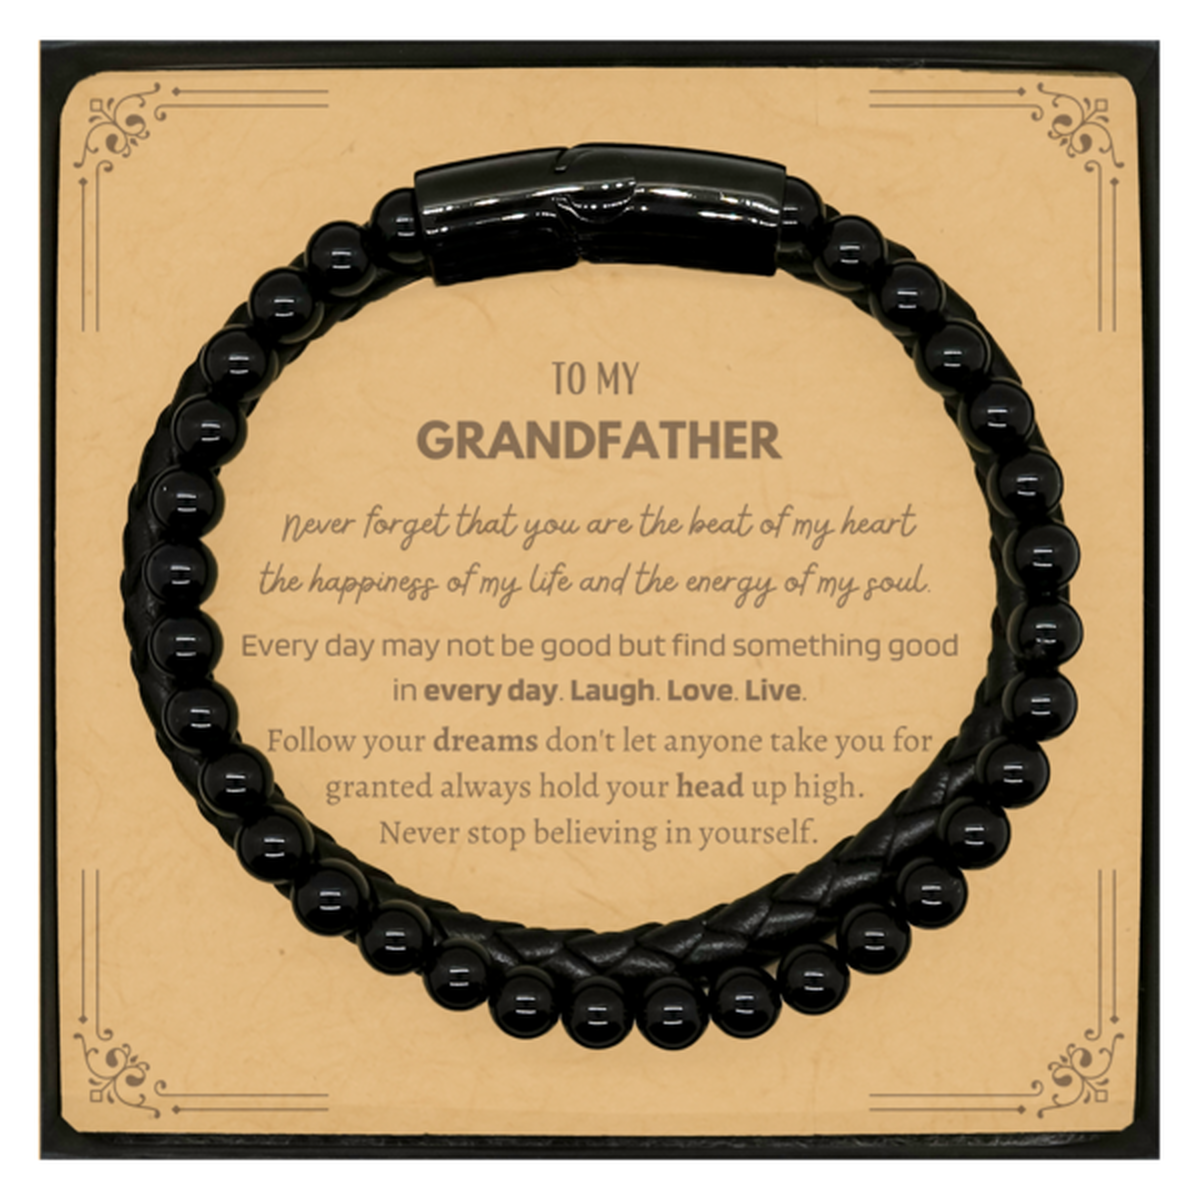 To My Grandfather Message Card Gifts, Christmas Grandfather Stone Leather Bracelets Present, Birthday Unique Motivational For Grandfather, To My Grandfather Never forget that you are the beat of my heart the happiness of my life and the energy of my soul